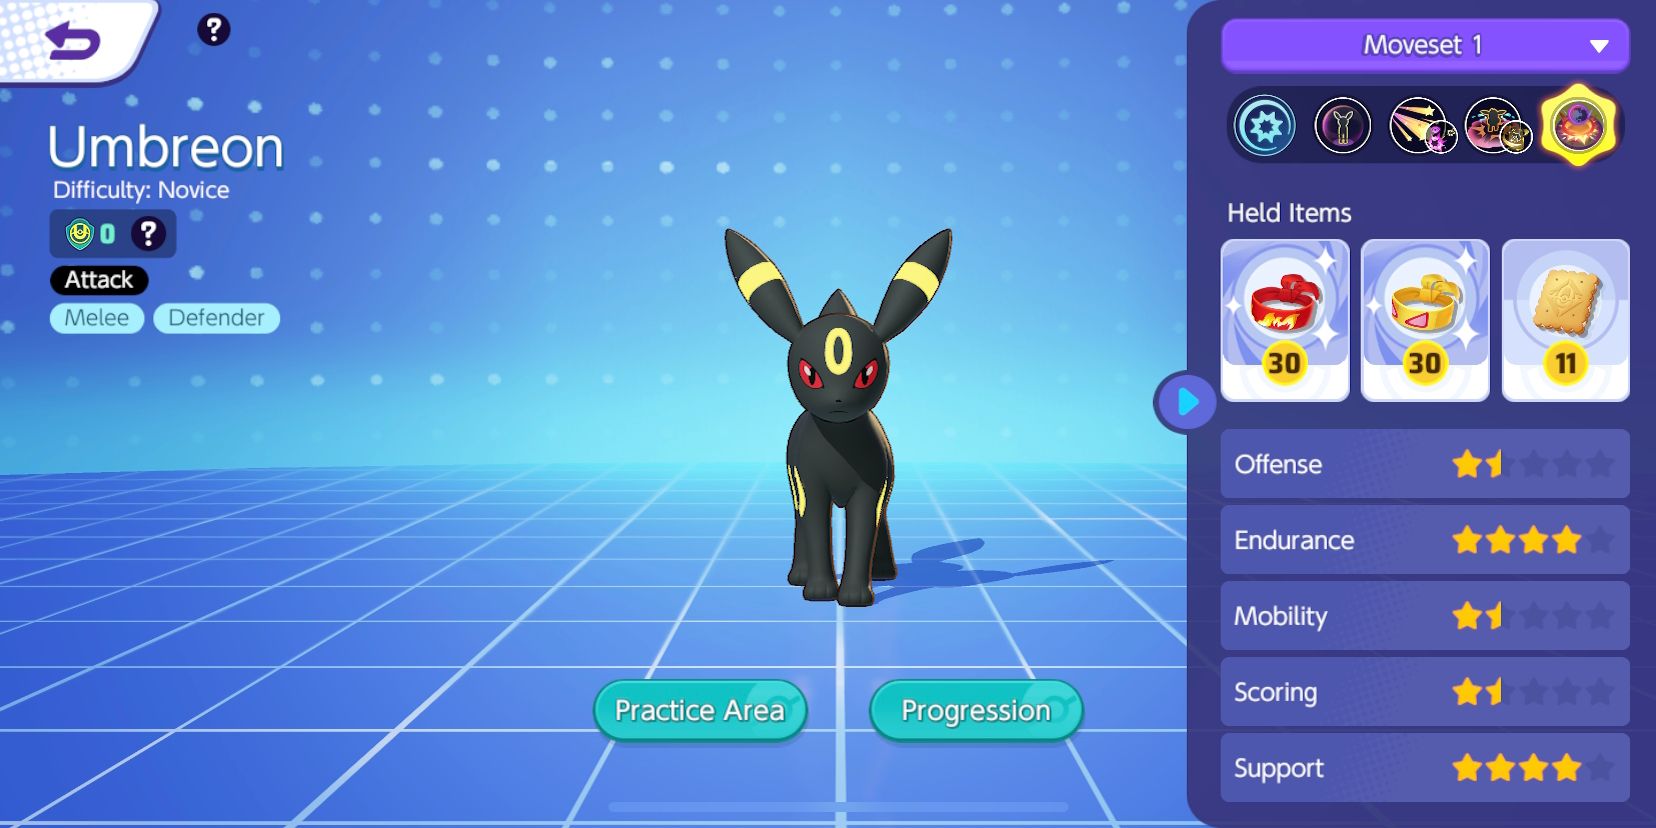 Pokemon Unite Umbreon on the Pokemon selection screen, showing stats and possessed items